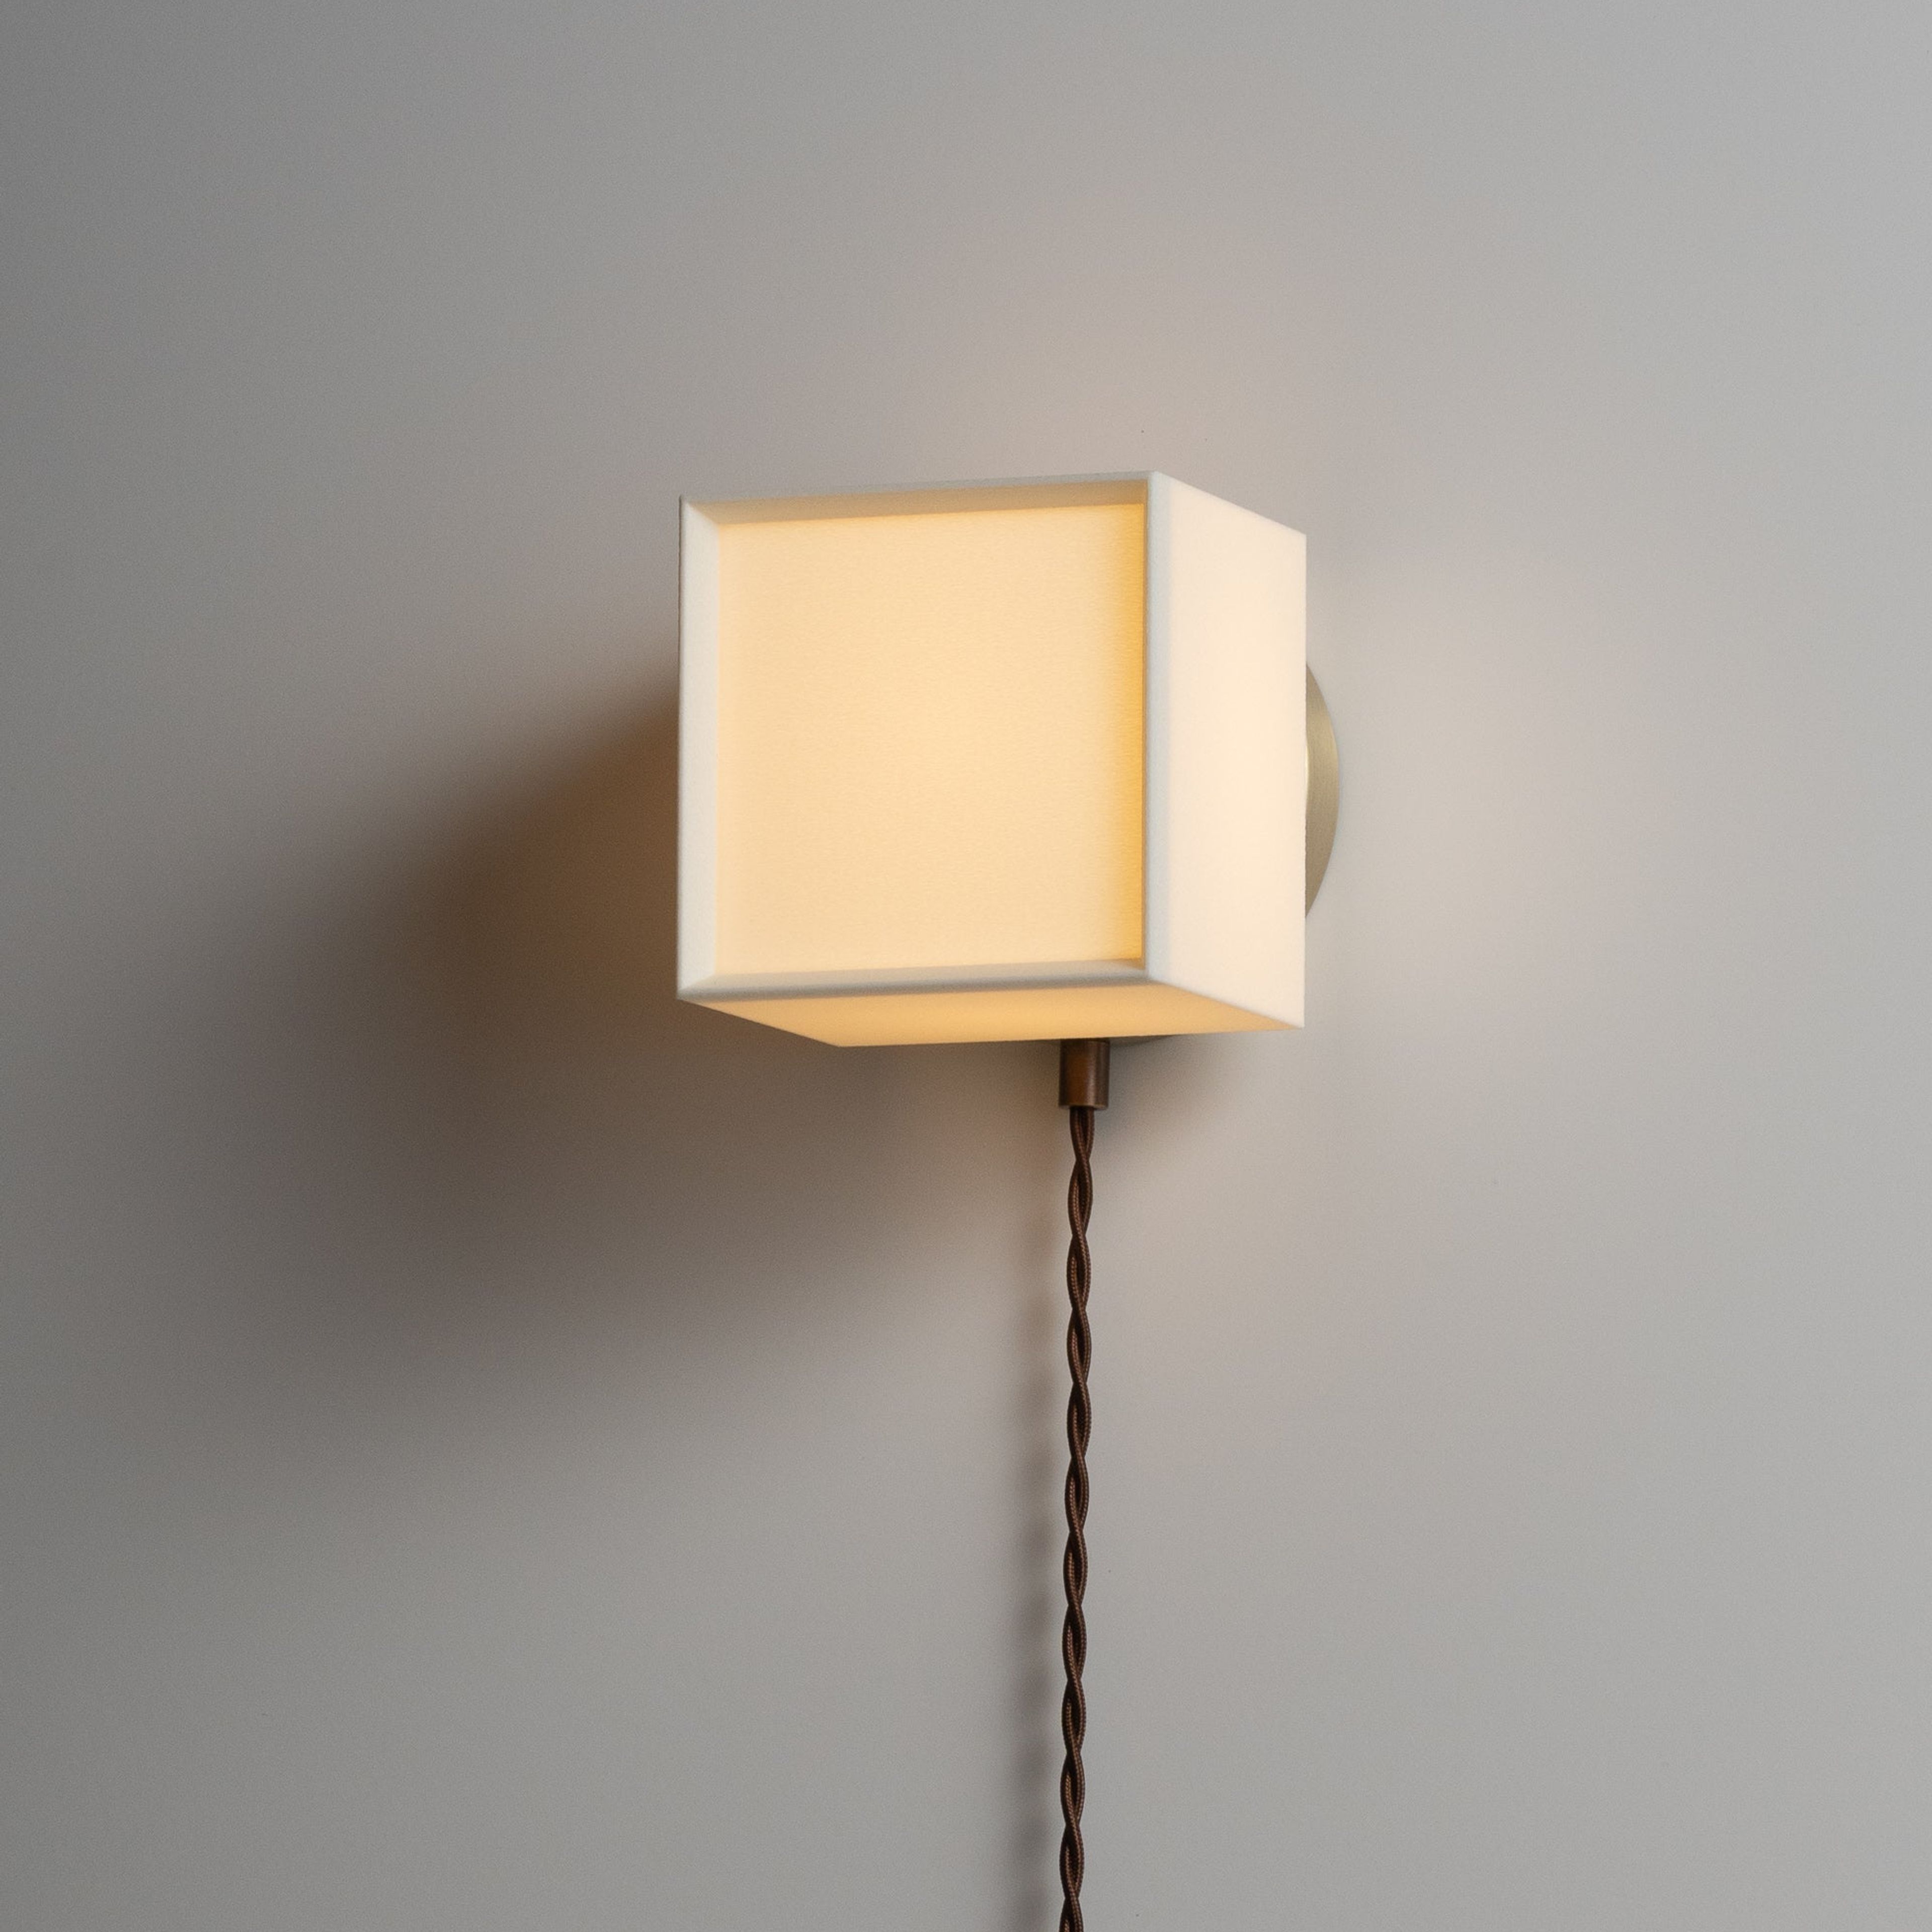 LAHM 06 Sconce Wired Plug-in